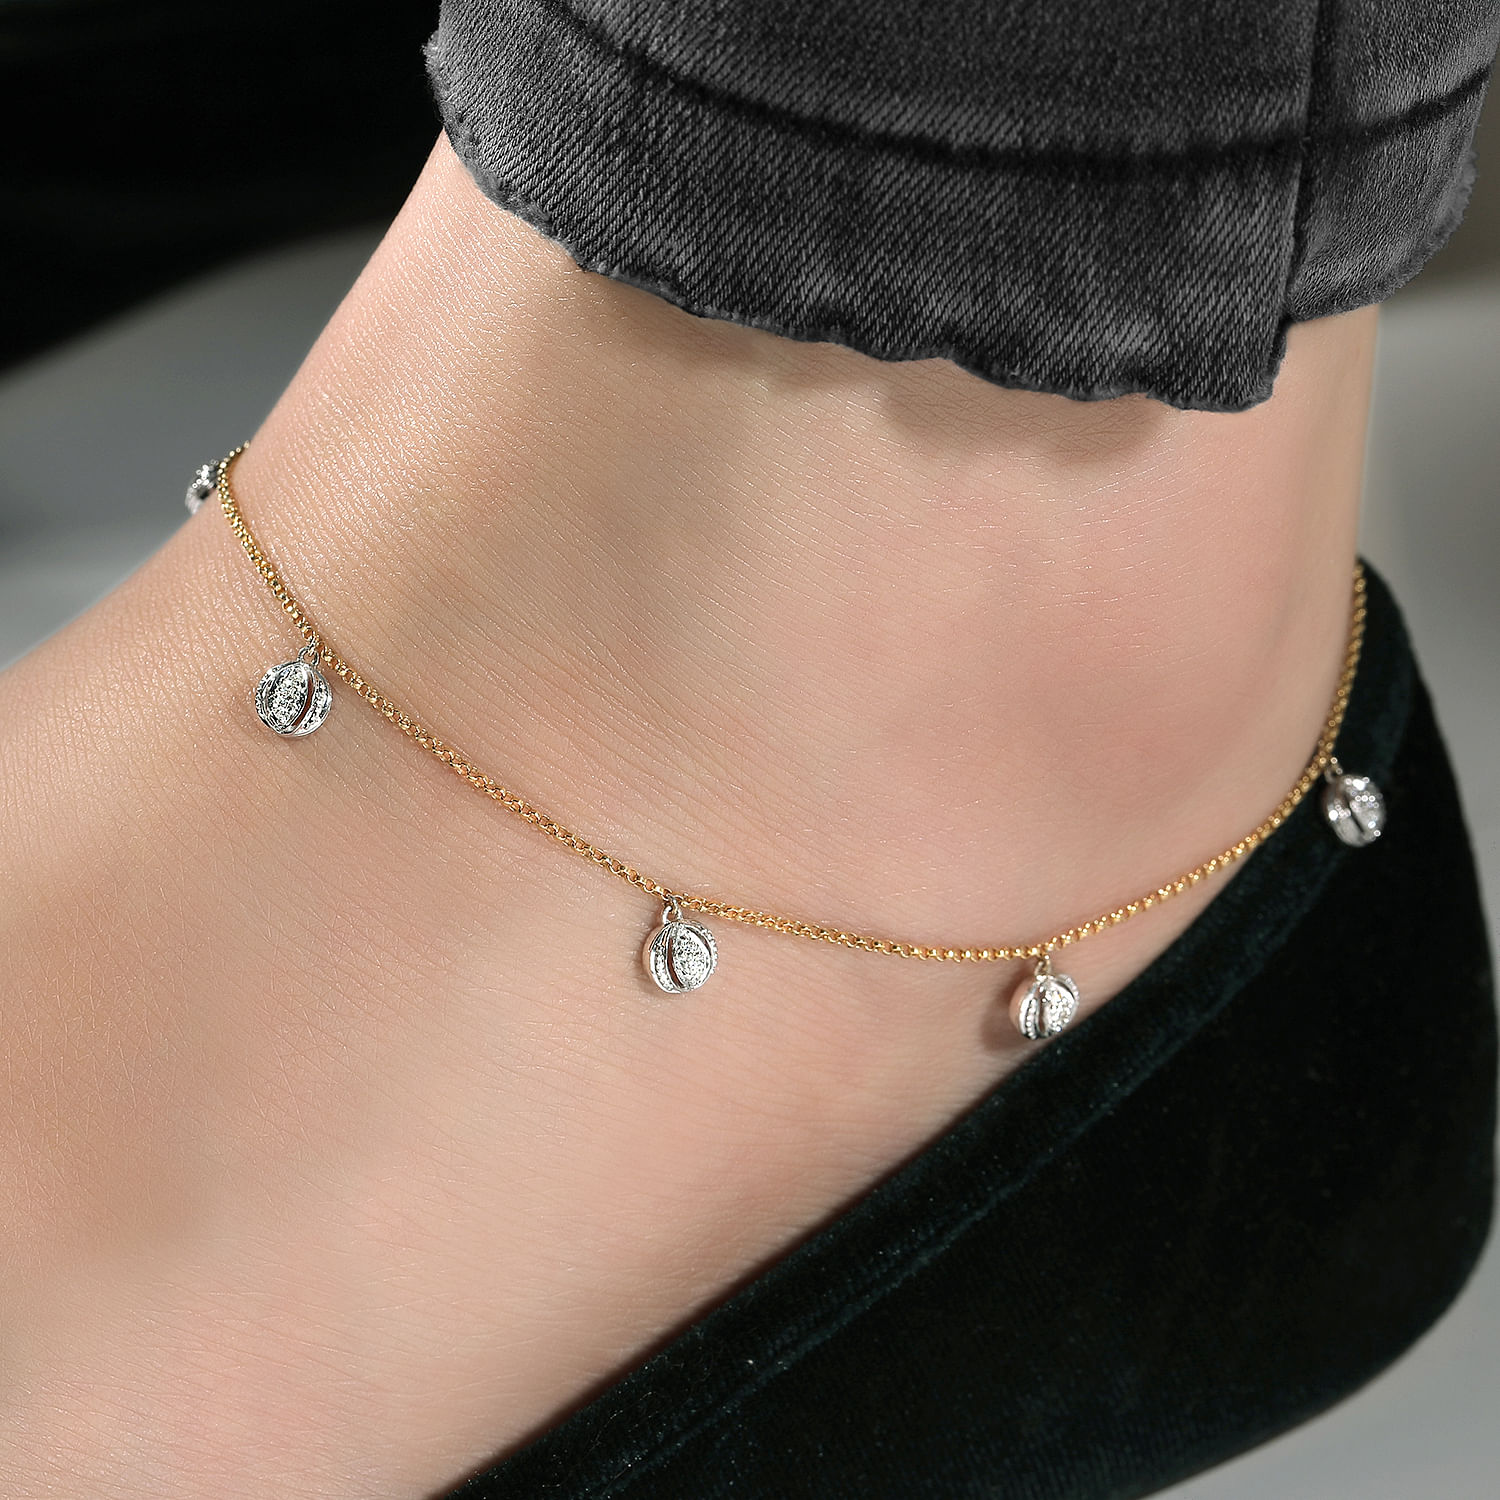 14K Yellow Gold Chain Ankle Bracelet with Round White Gold Diamond Drops - 0.13 ct - Shot 3